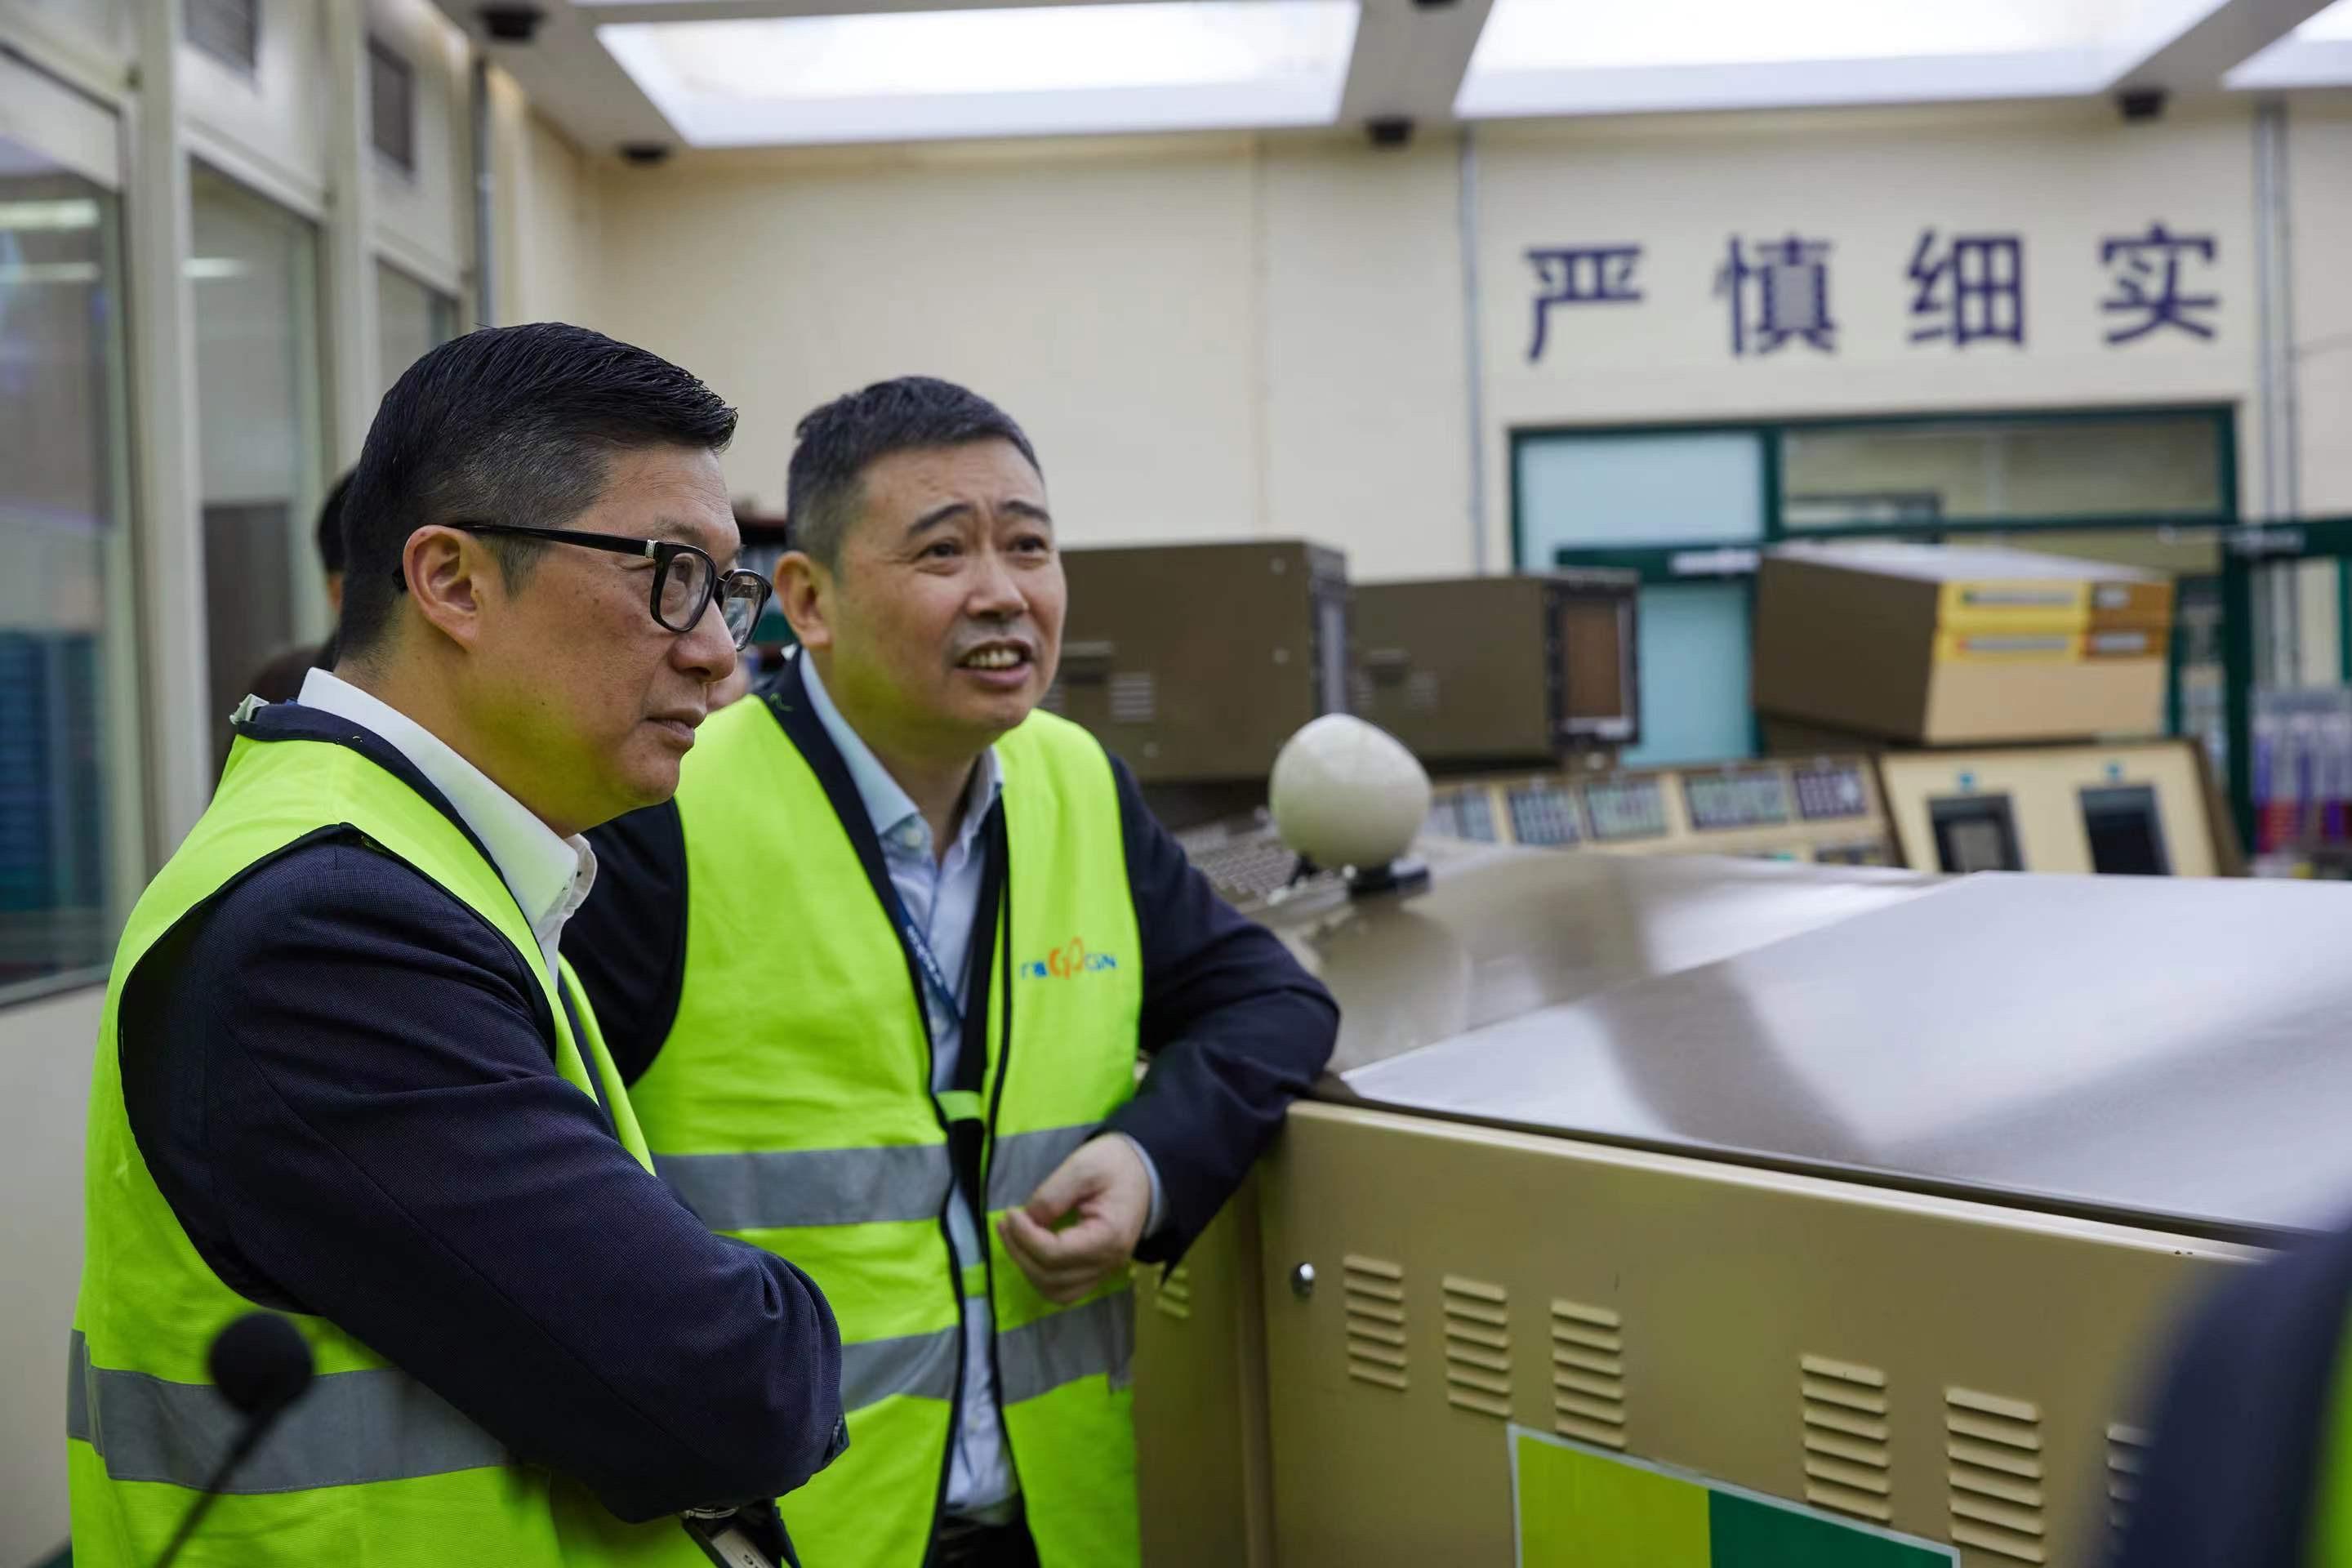 The Secretary for Security, Mr Tang Ping-keung (left), today (April 20) visited the Daya Bay Nuclear Power Site in Shenzhen. Photo shows Mr Tang, accompanied by the Senior Vice President of China General Nuclear Power Corporation, Mr Guo Limin (right), visiting the main control room of Daya Bay Nuclear Power Station.